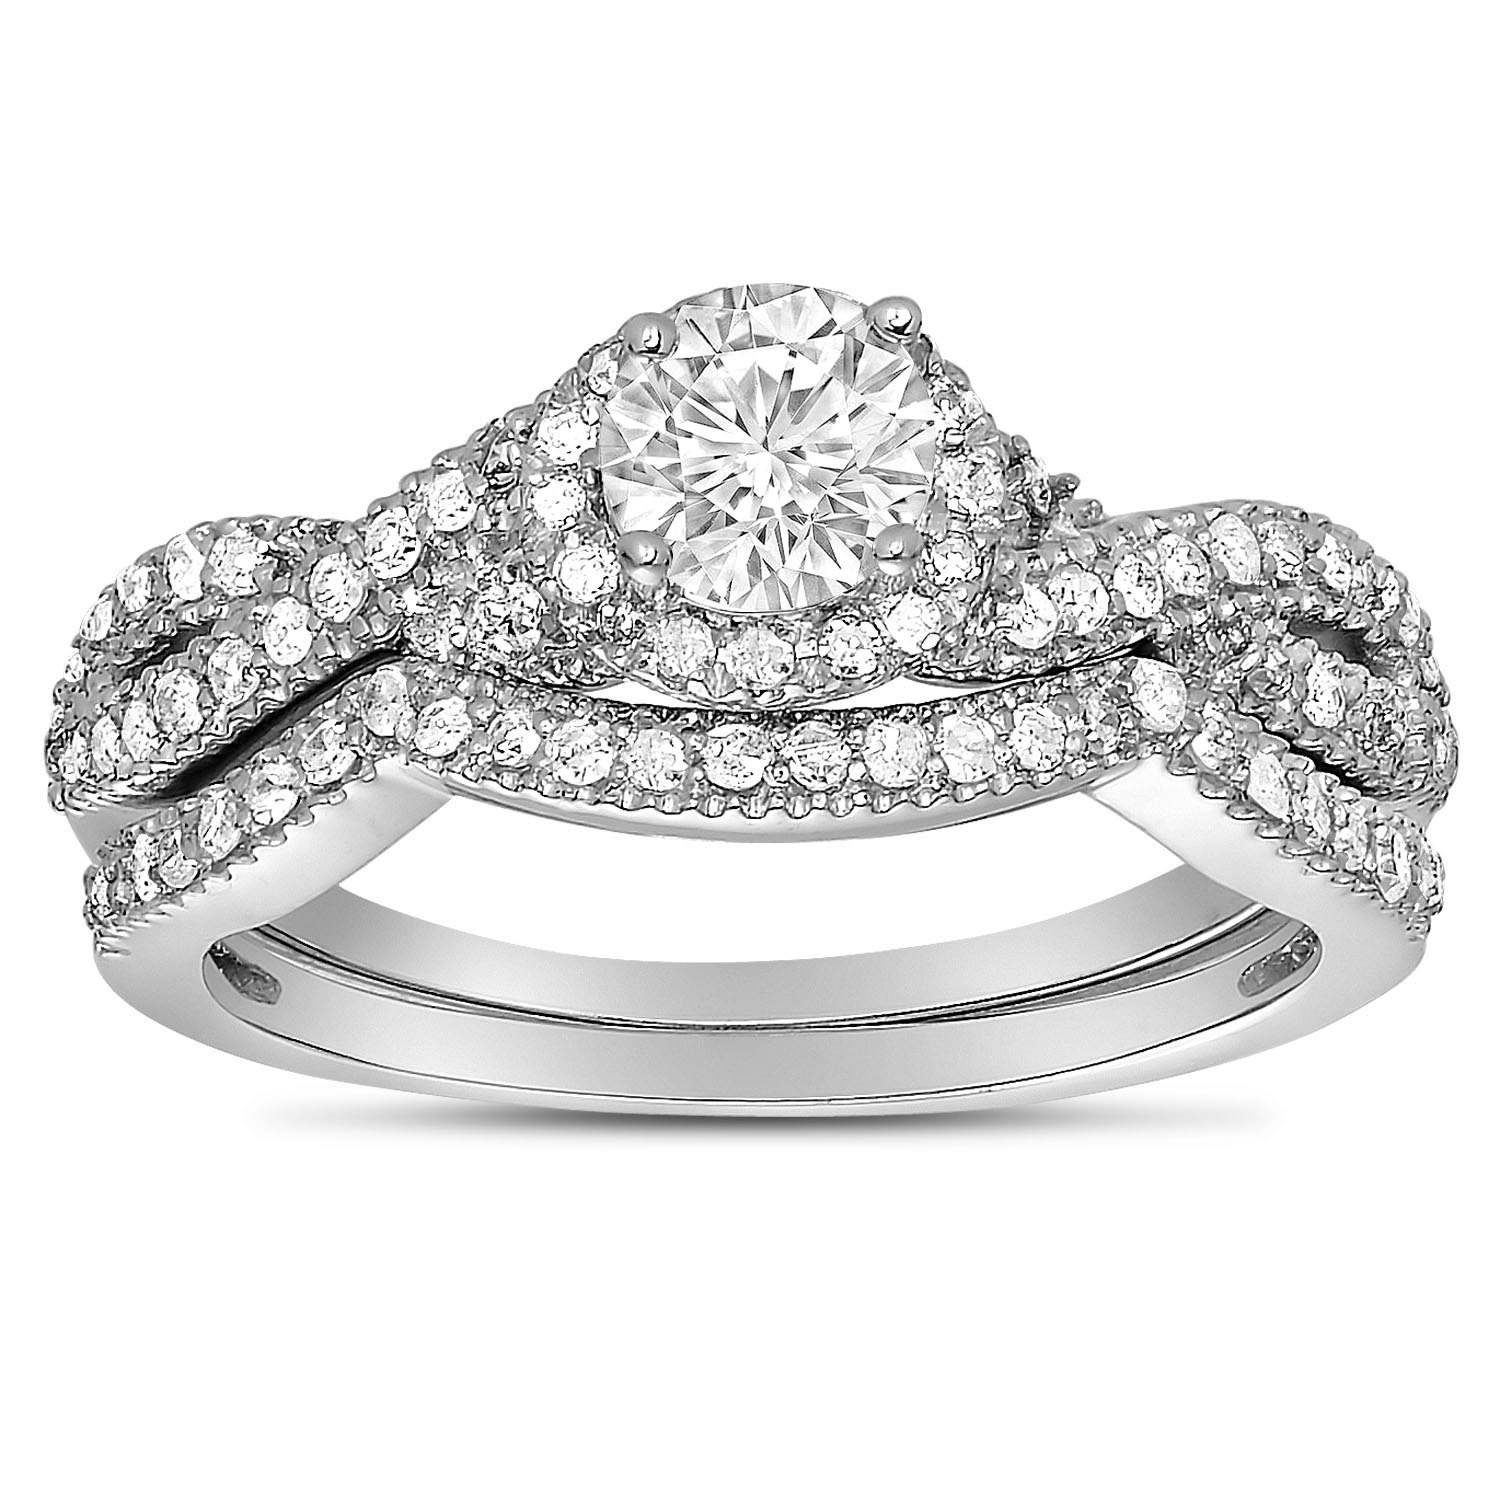 Carat Round Diamond Infinity Wedding Ring Set in White Gold for Her